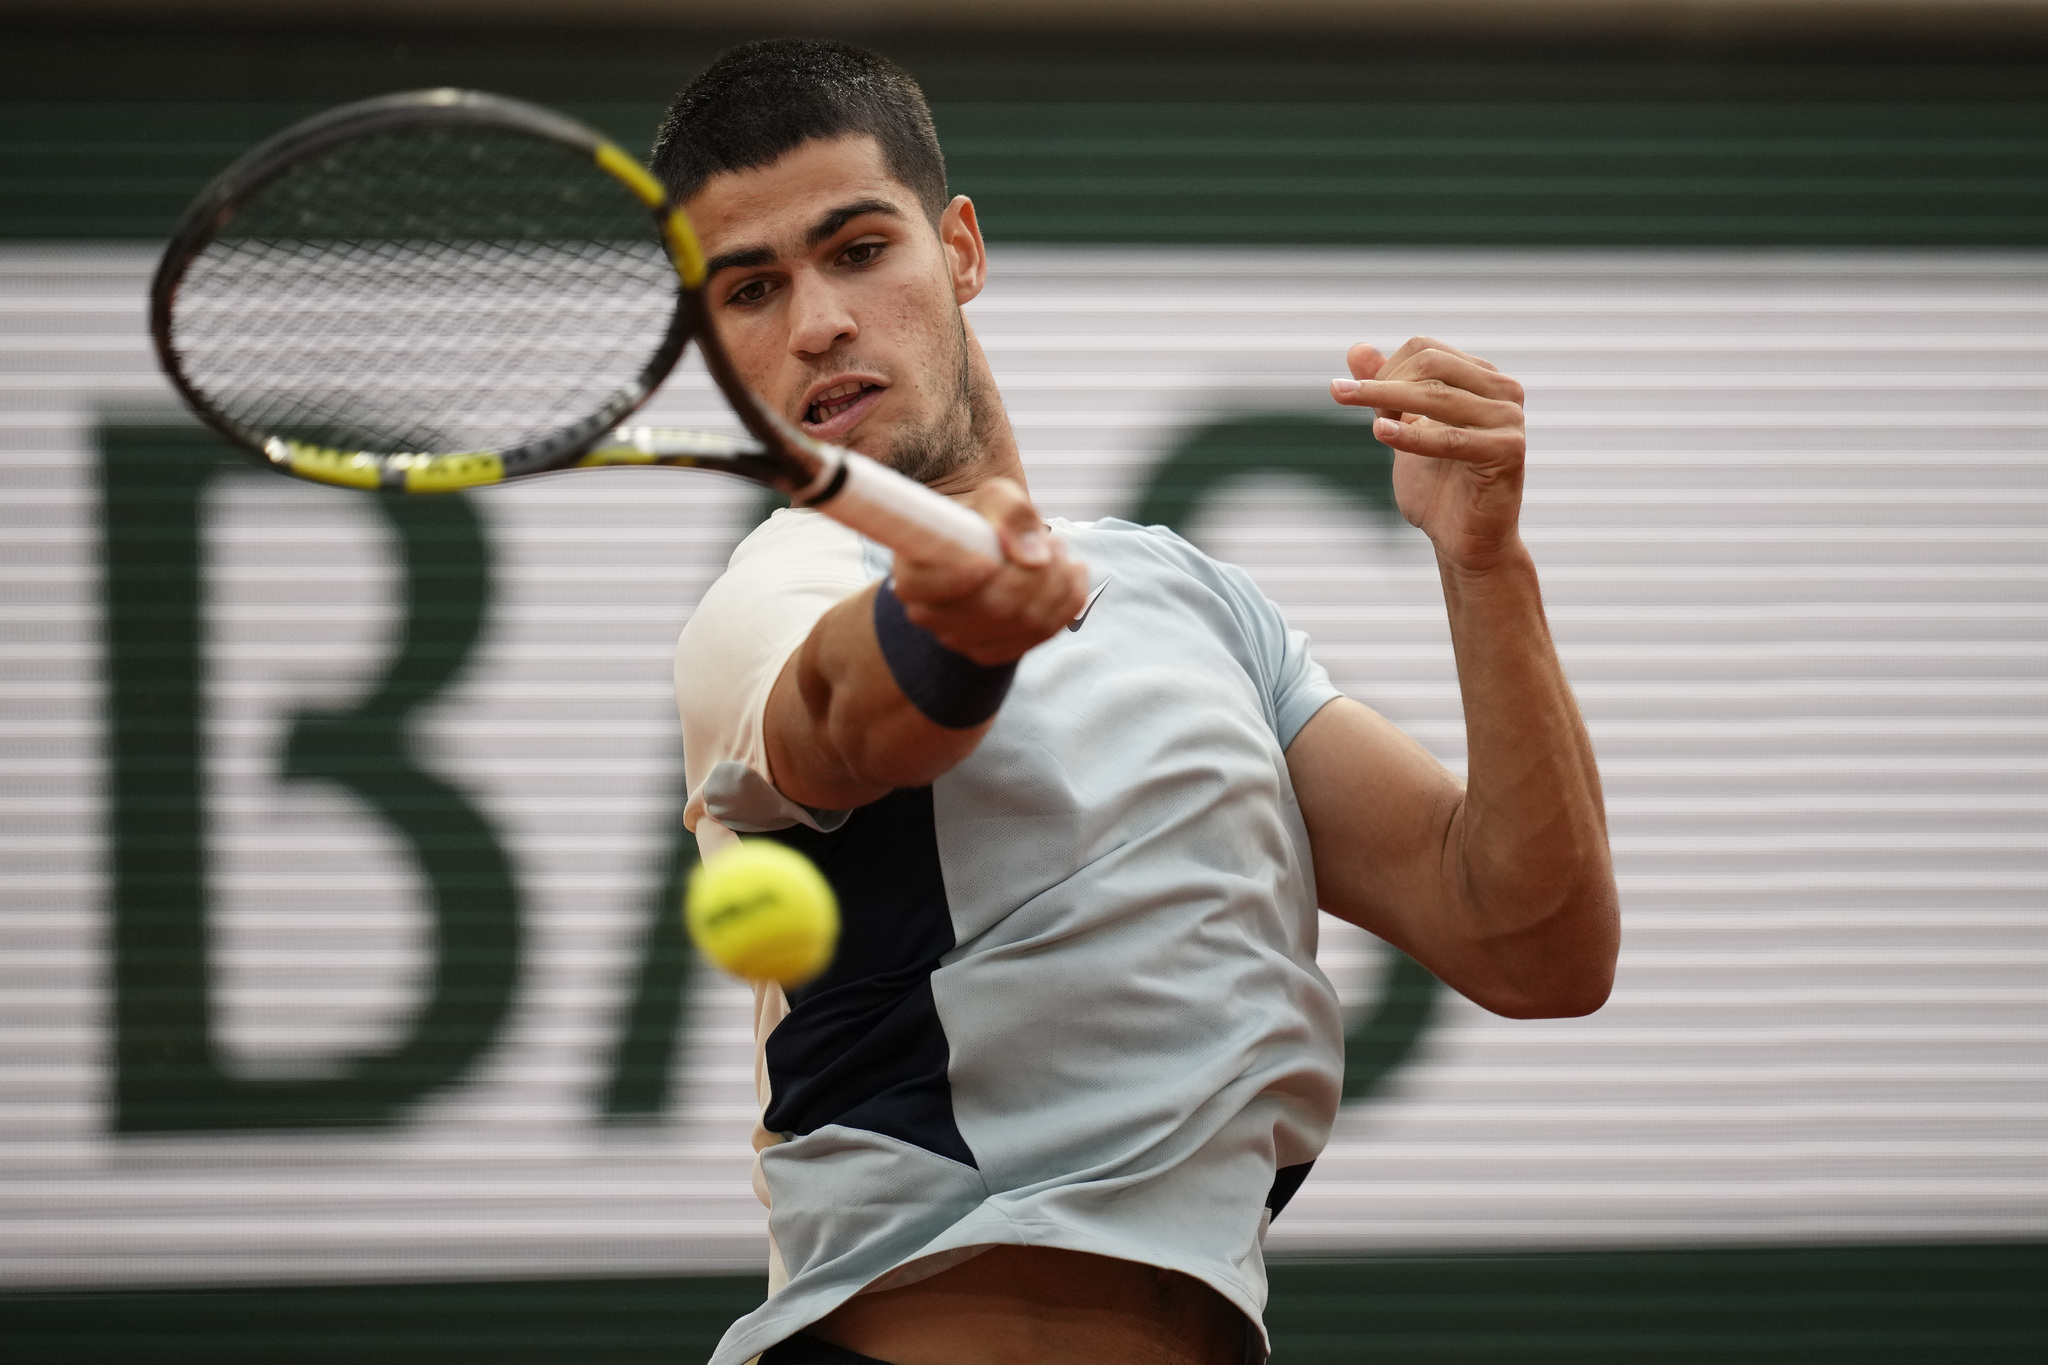 Spain's Carlos  lt;HIT gt;Alcaraz lt;/HIT gt; plays a shot against Argentina's Juan Ignacio Londero during their first round match at the French Open tennis tournament in Roland Garros stadium in Paris, France, Sunday, May 22, 2022. (AP Photo/Christophe Ena)